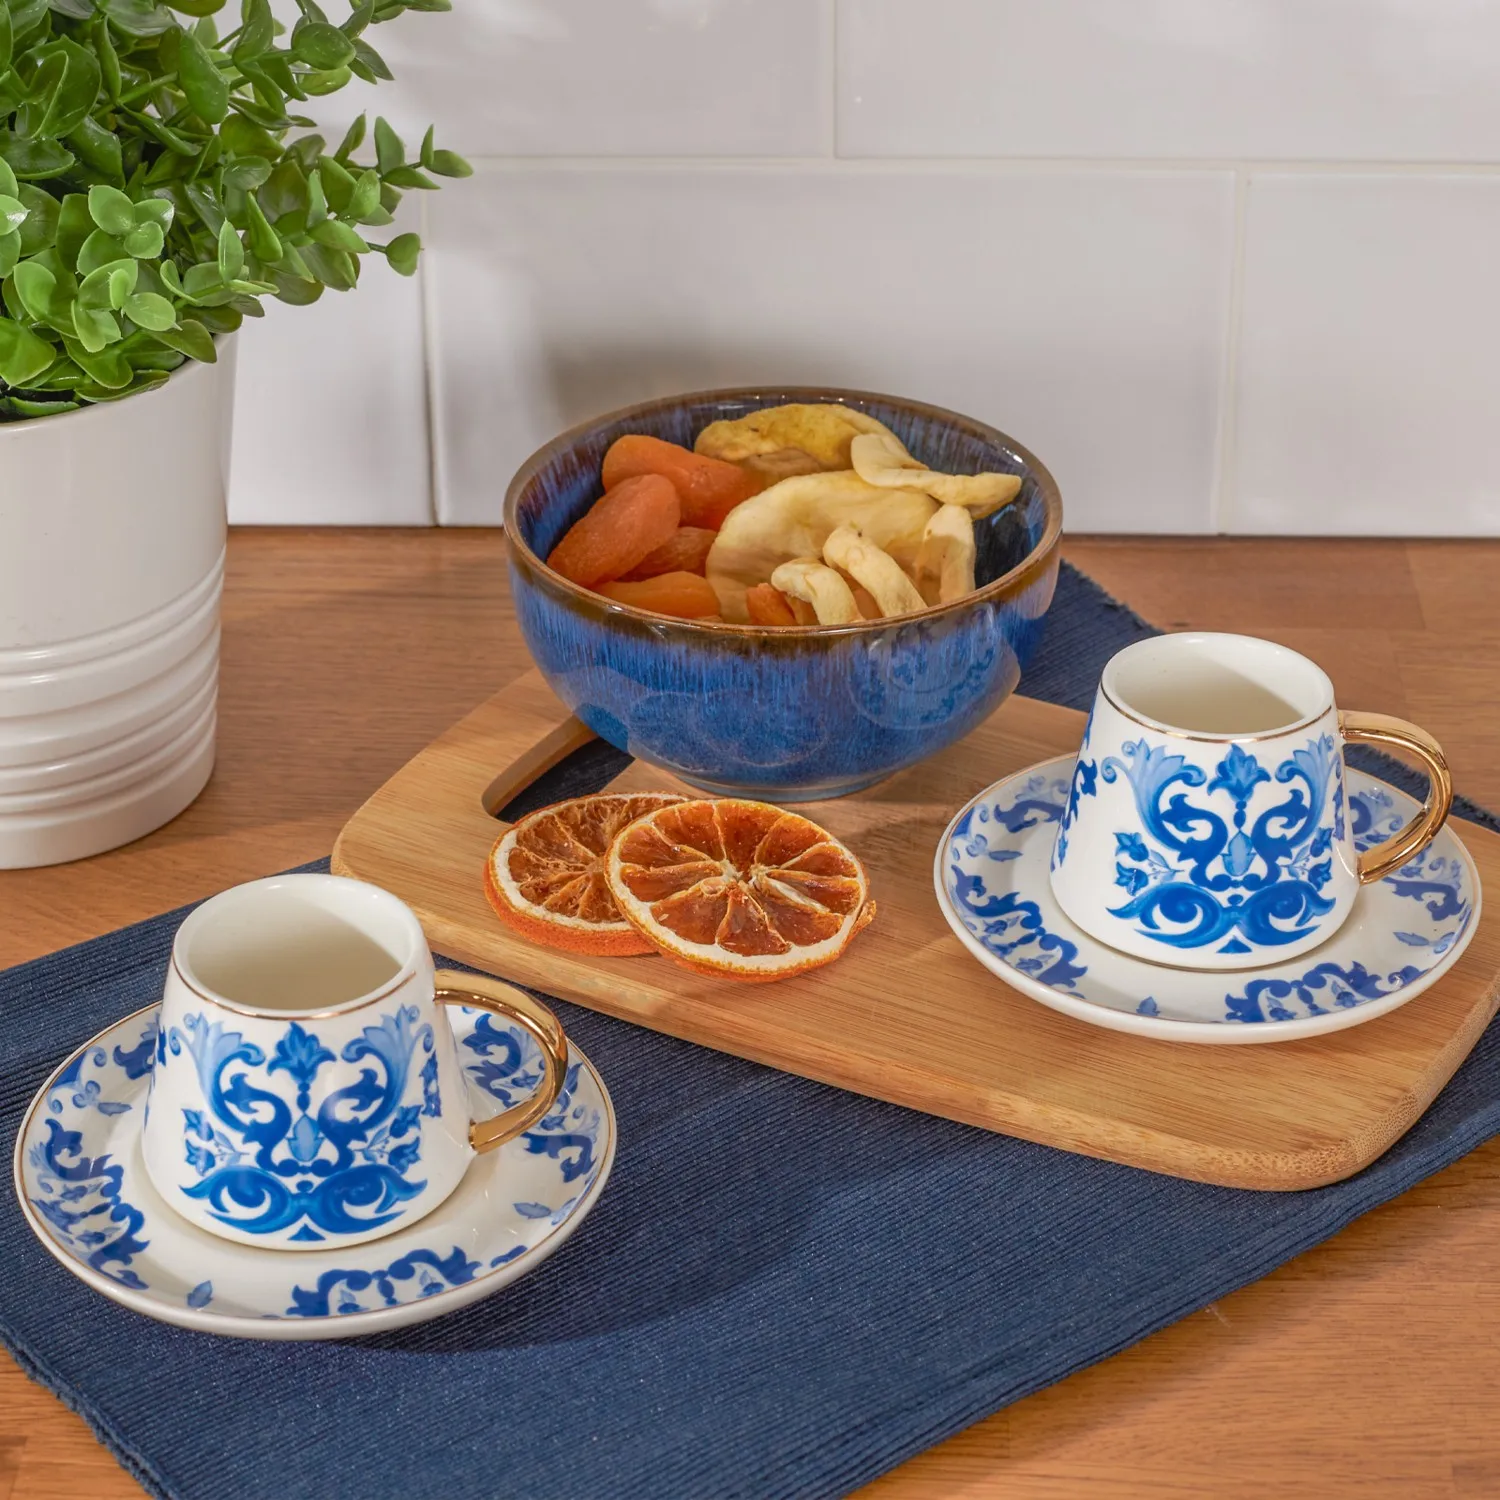 

Karaca Stream 2 Personality Coffee cup Set Blue Cream-Colored Flower Patterned Naive Polite Style Oval Wide Form Modern Appearance